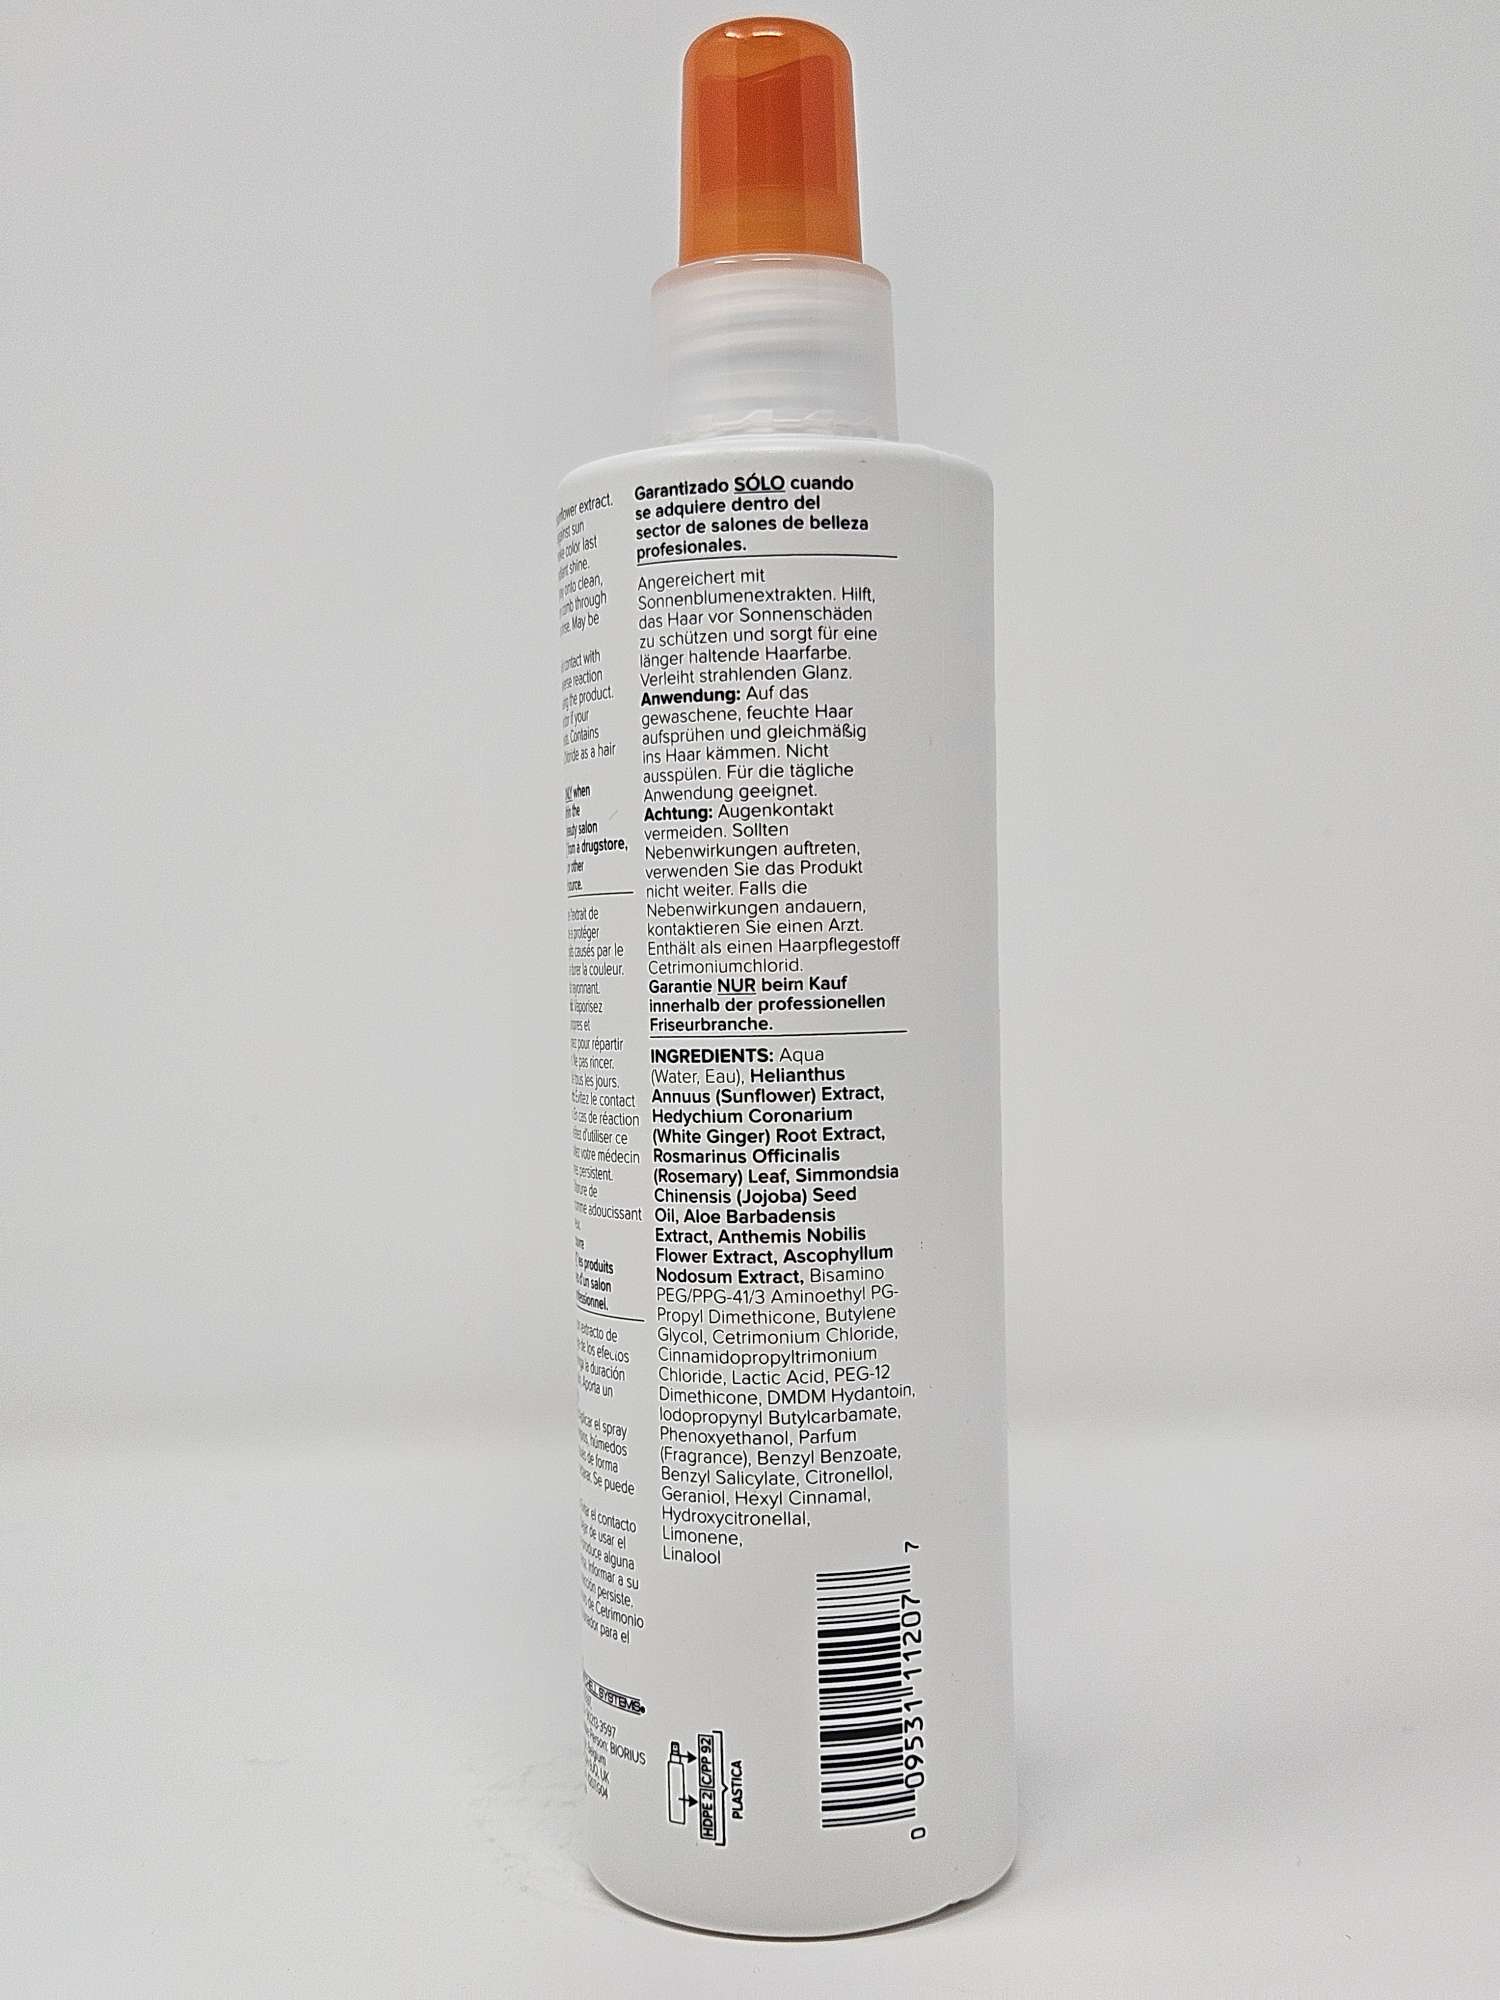 Paul Mitchell Color Protect Locking Spray